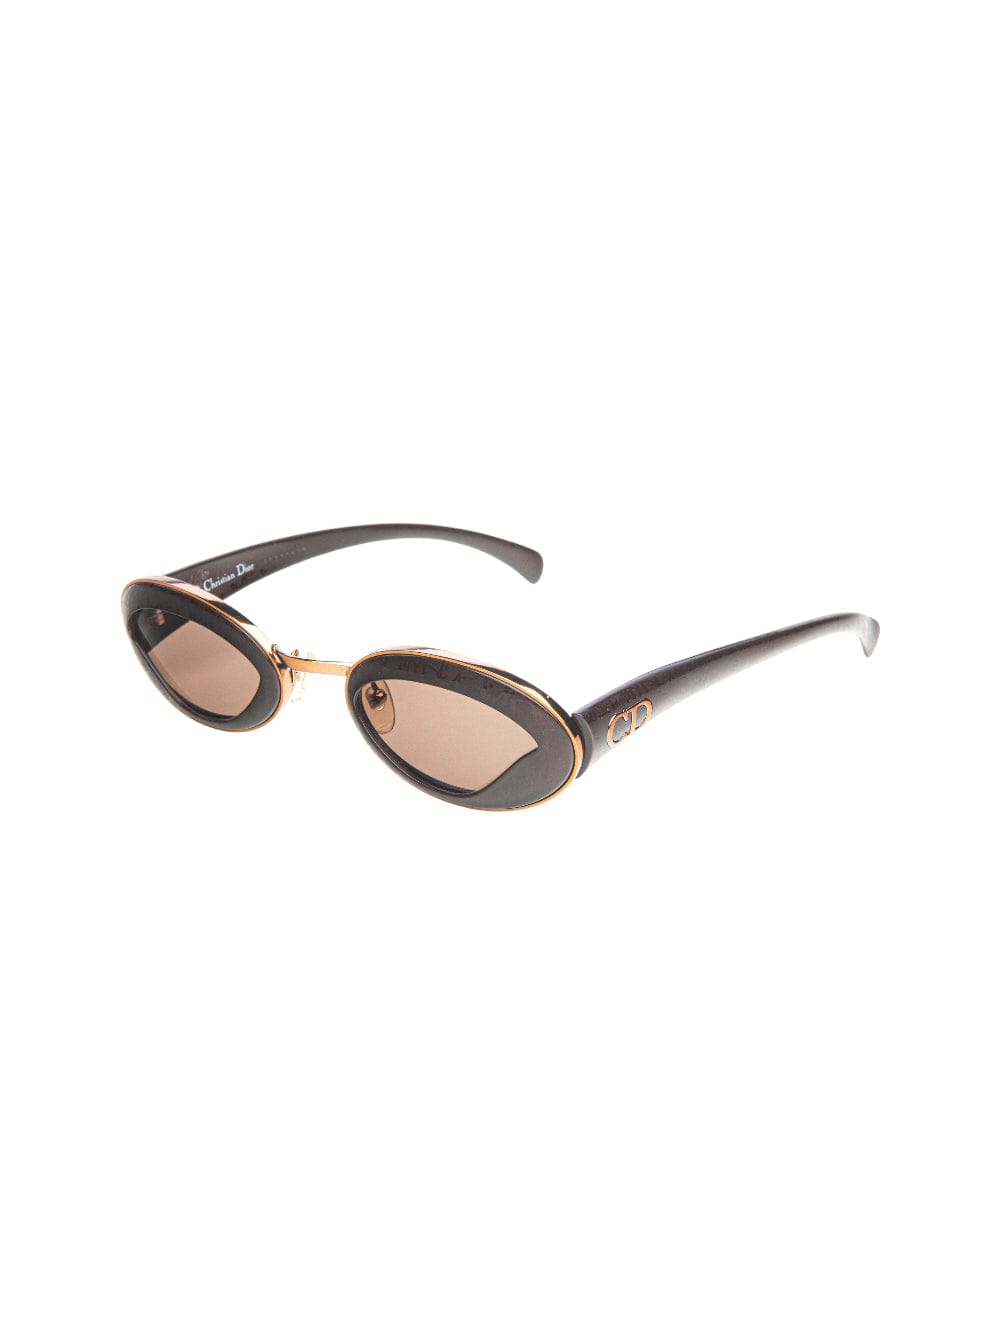 Pin Up - Limited Edition - Dark Brown Sunglasses